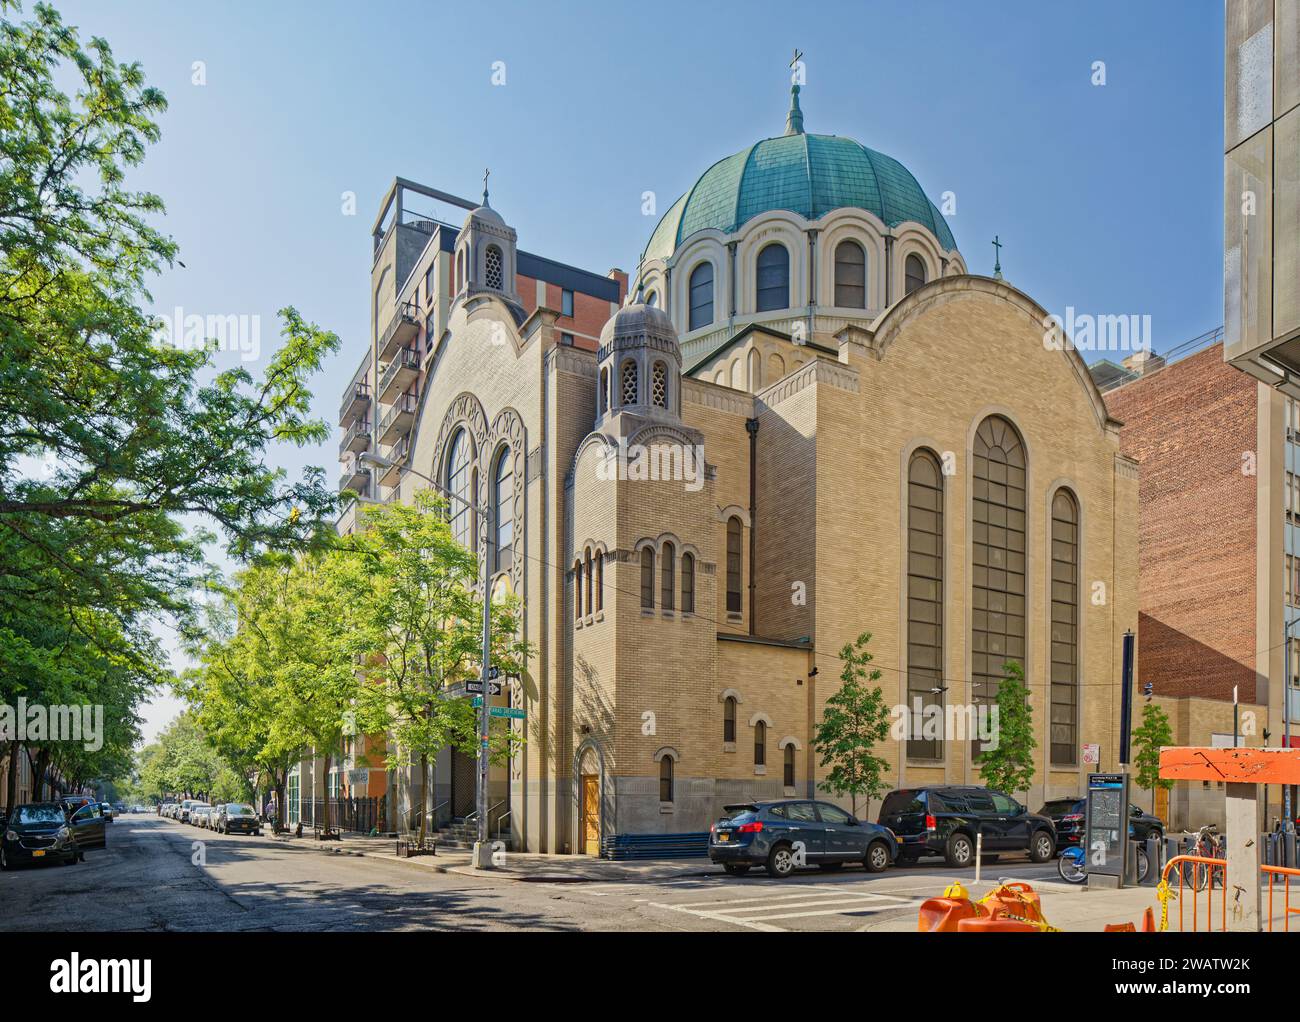 St. George Ukrainian Catholic Church was built in 1978, designed by Apollinaire Osadca in Byzantine Revival style with dome and gilt mosaics. Stock Photo